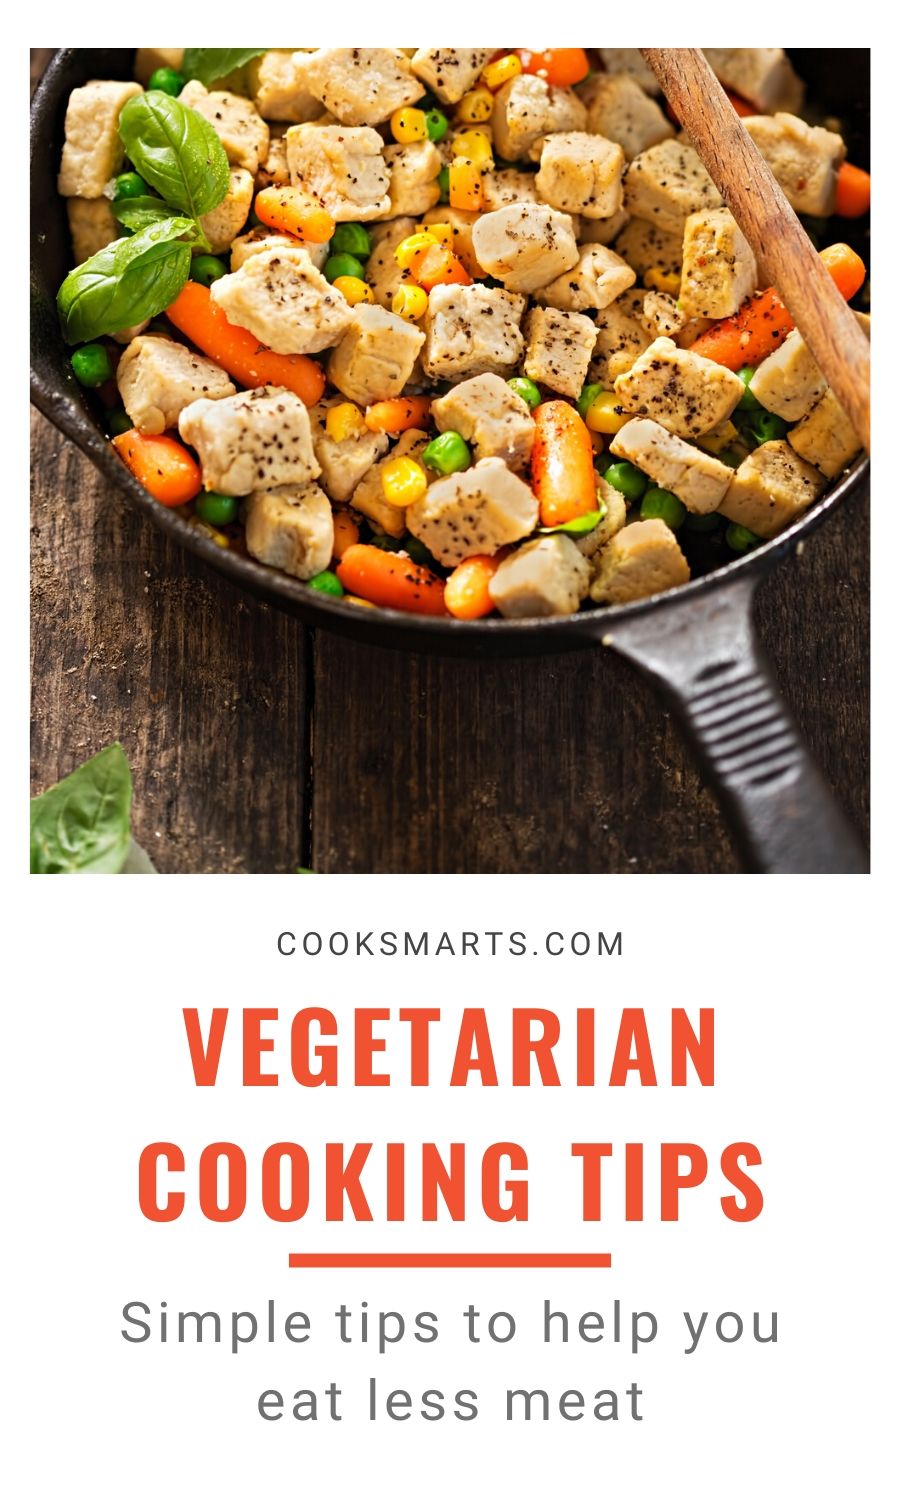 Getting Started With Meatless Cooking | Cook Smarts